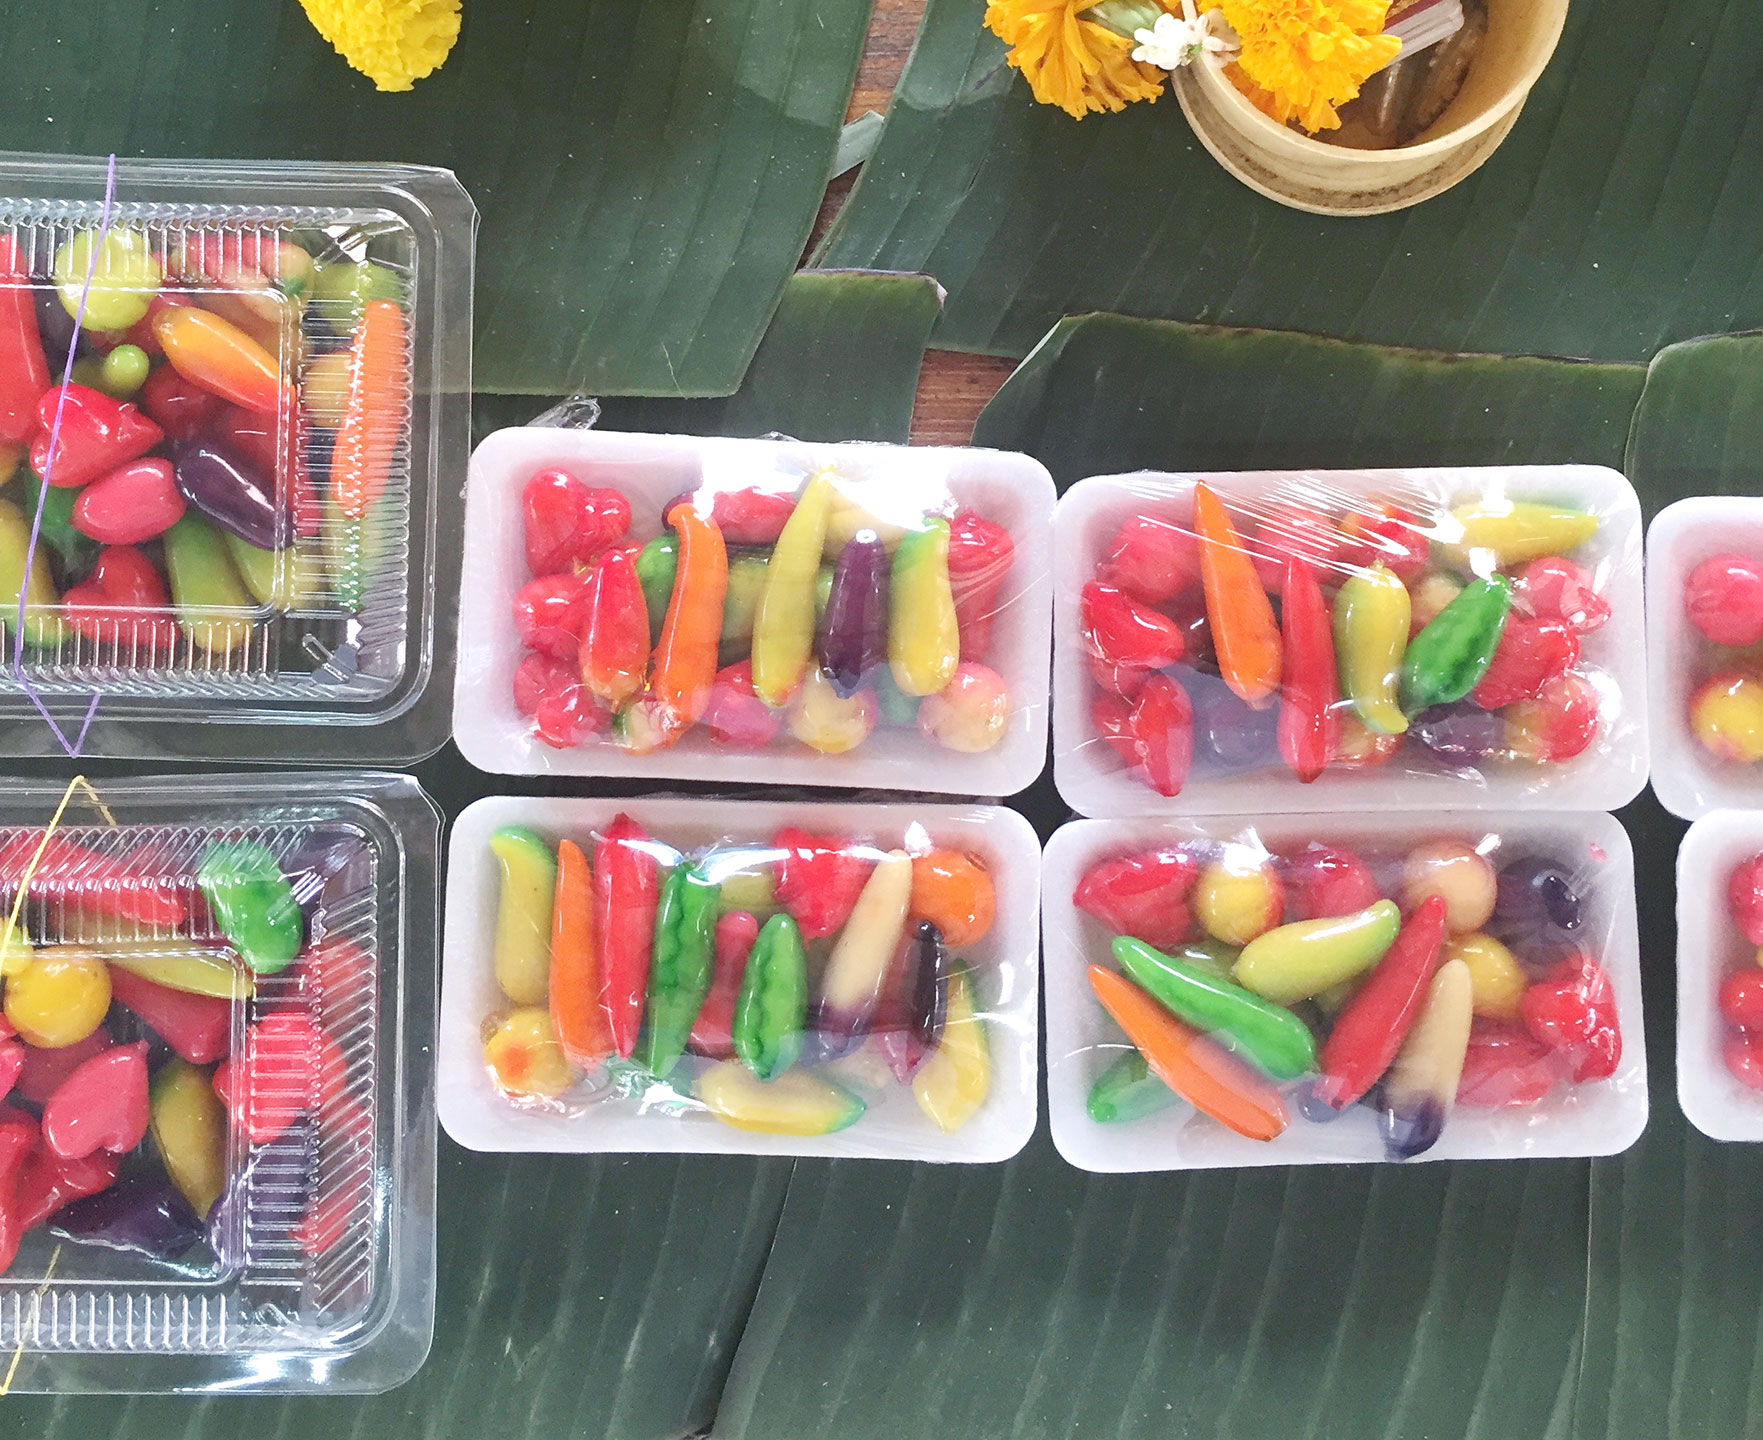  Fruit and vegetable shaped little desserts called Luk Chup. 